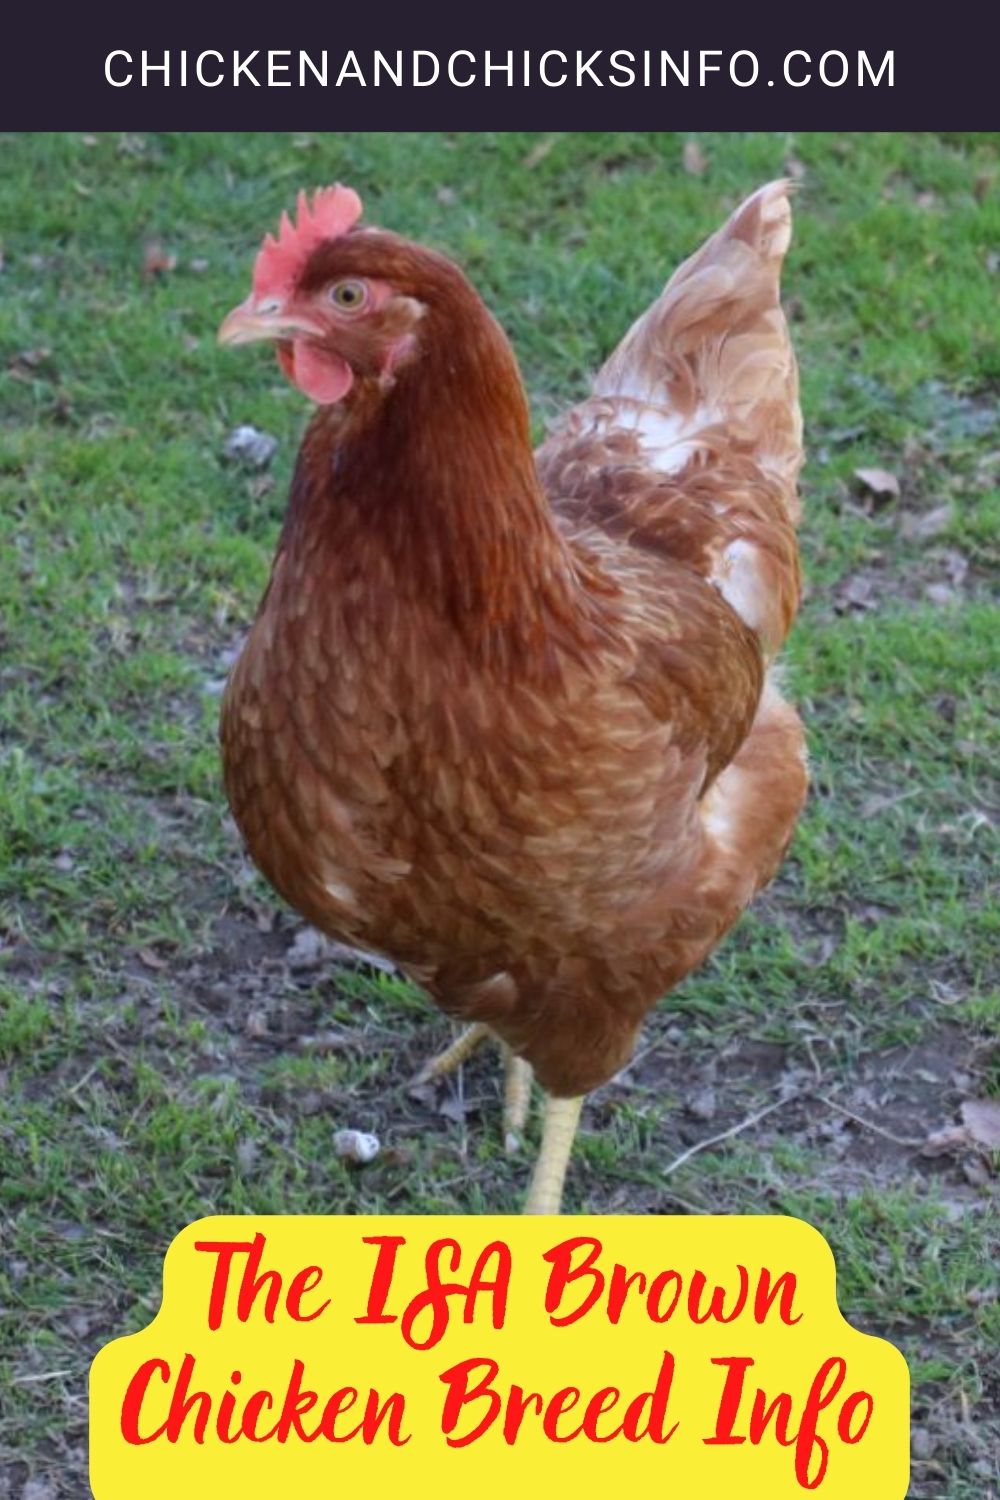 The ISA Brown Chicken Breed Info pinterest image.